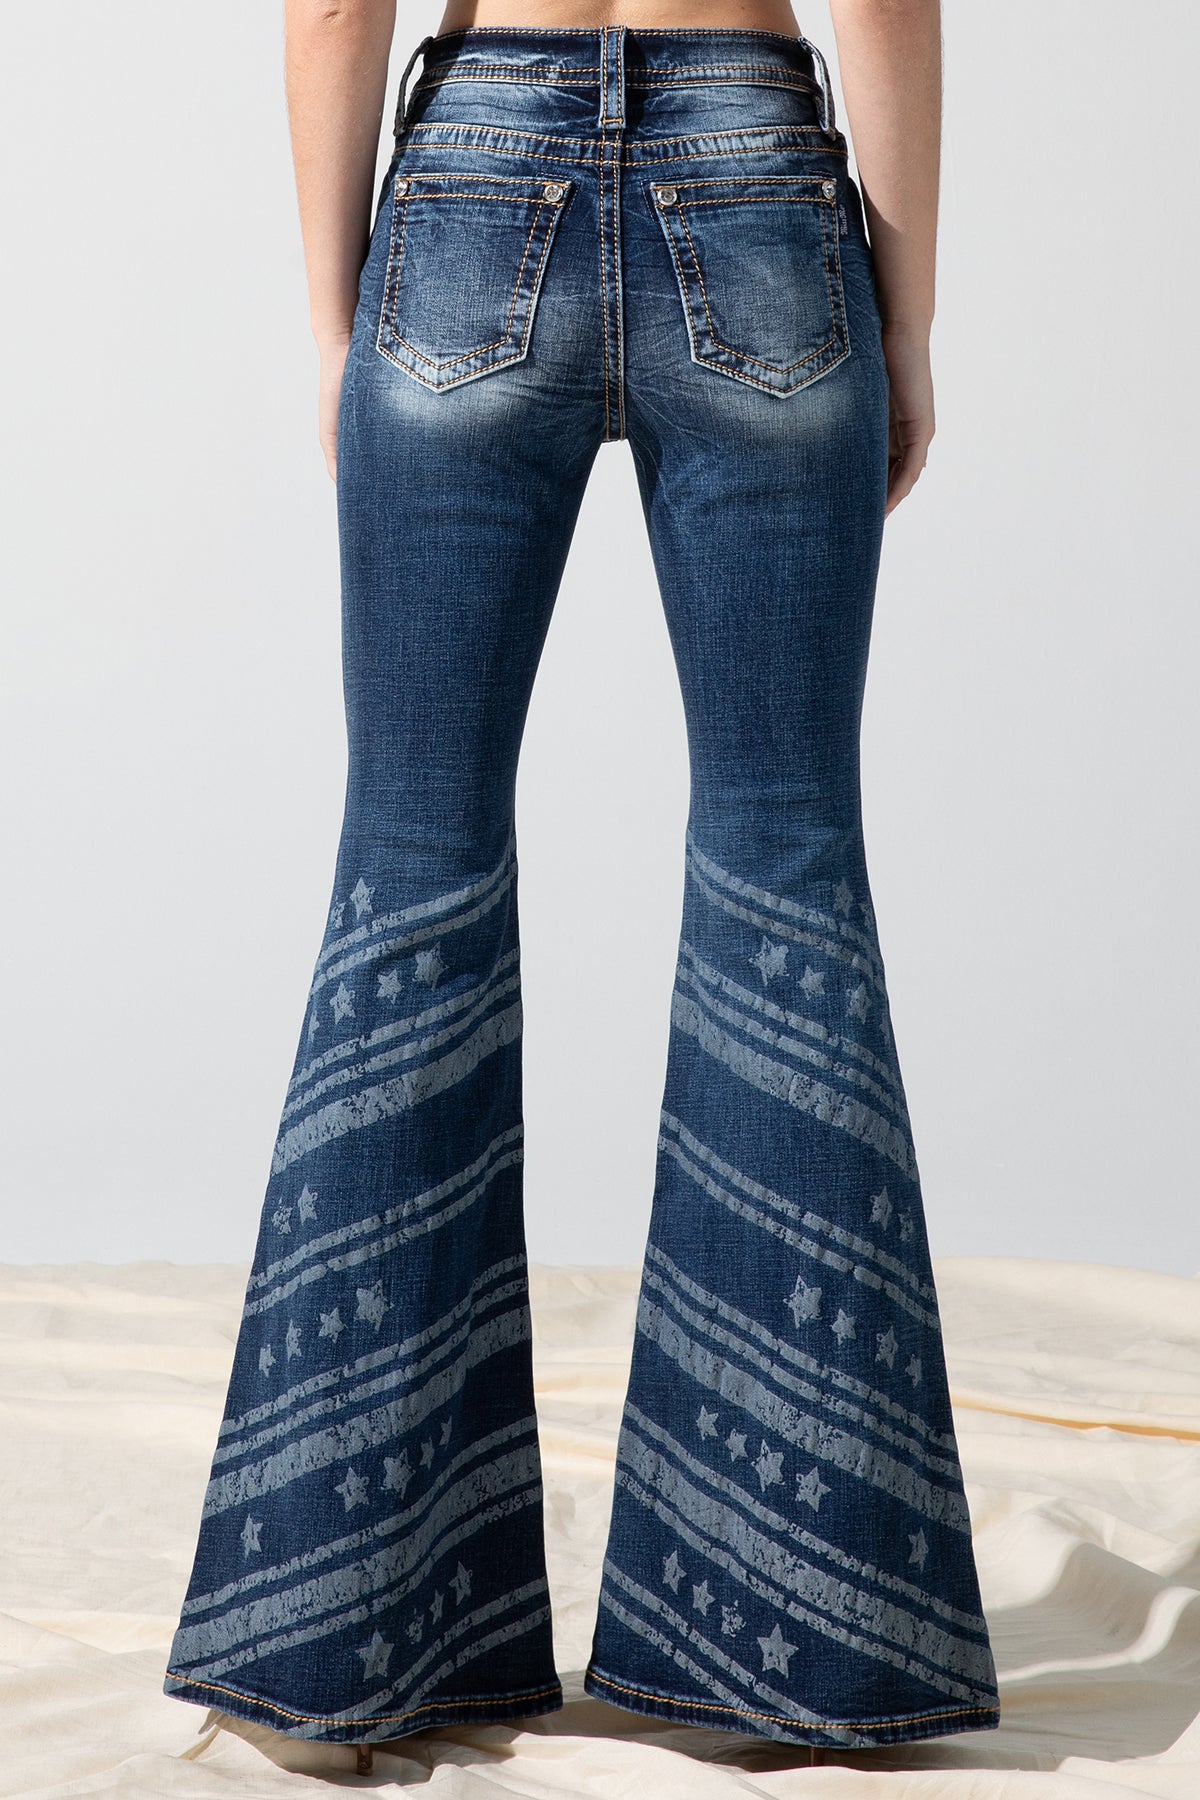 Stars n Stripes High Rise Flare Jean, Only $119.00